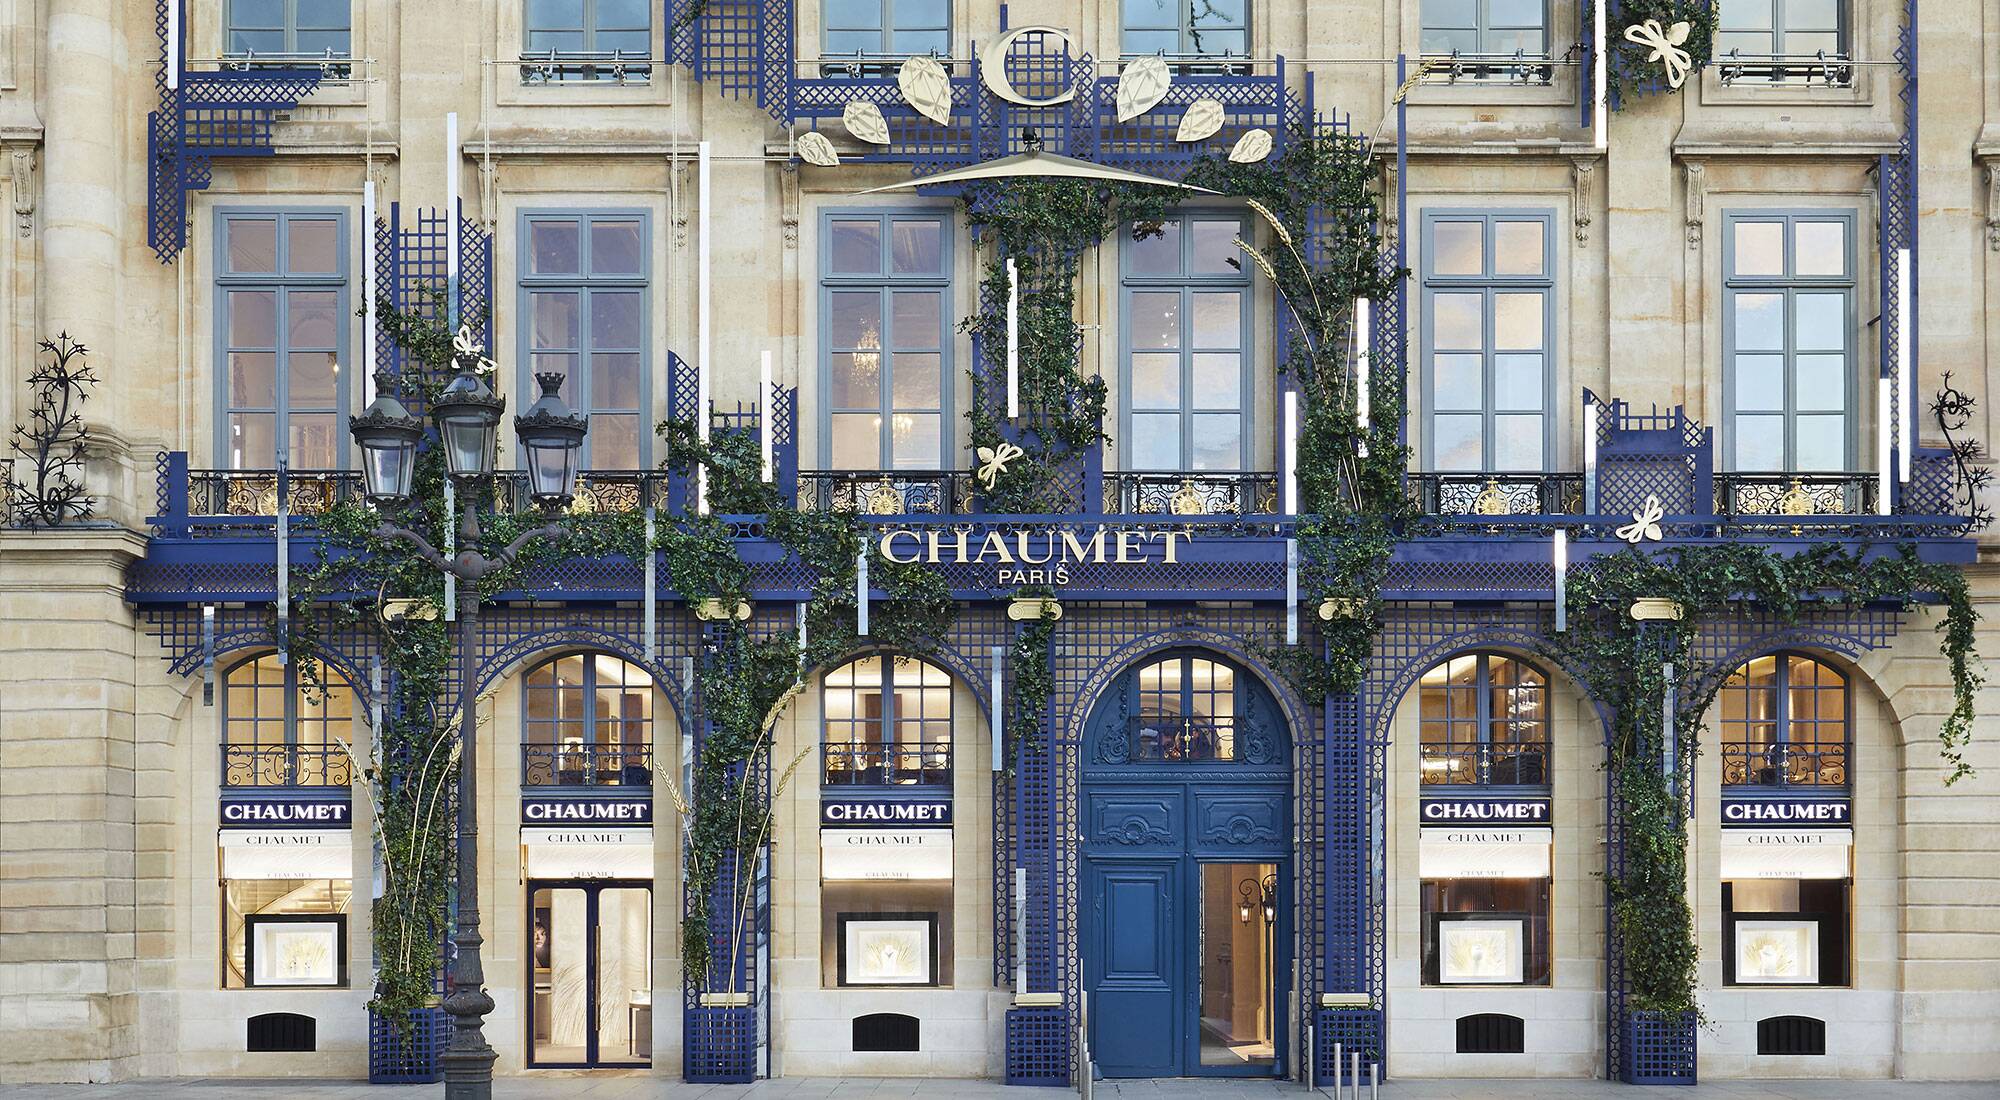 Welcome to the legendary 12 Vendôme, Chaumet's newly renovated